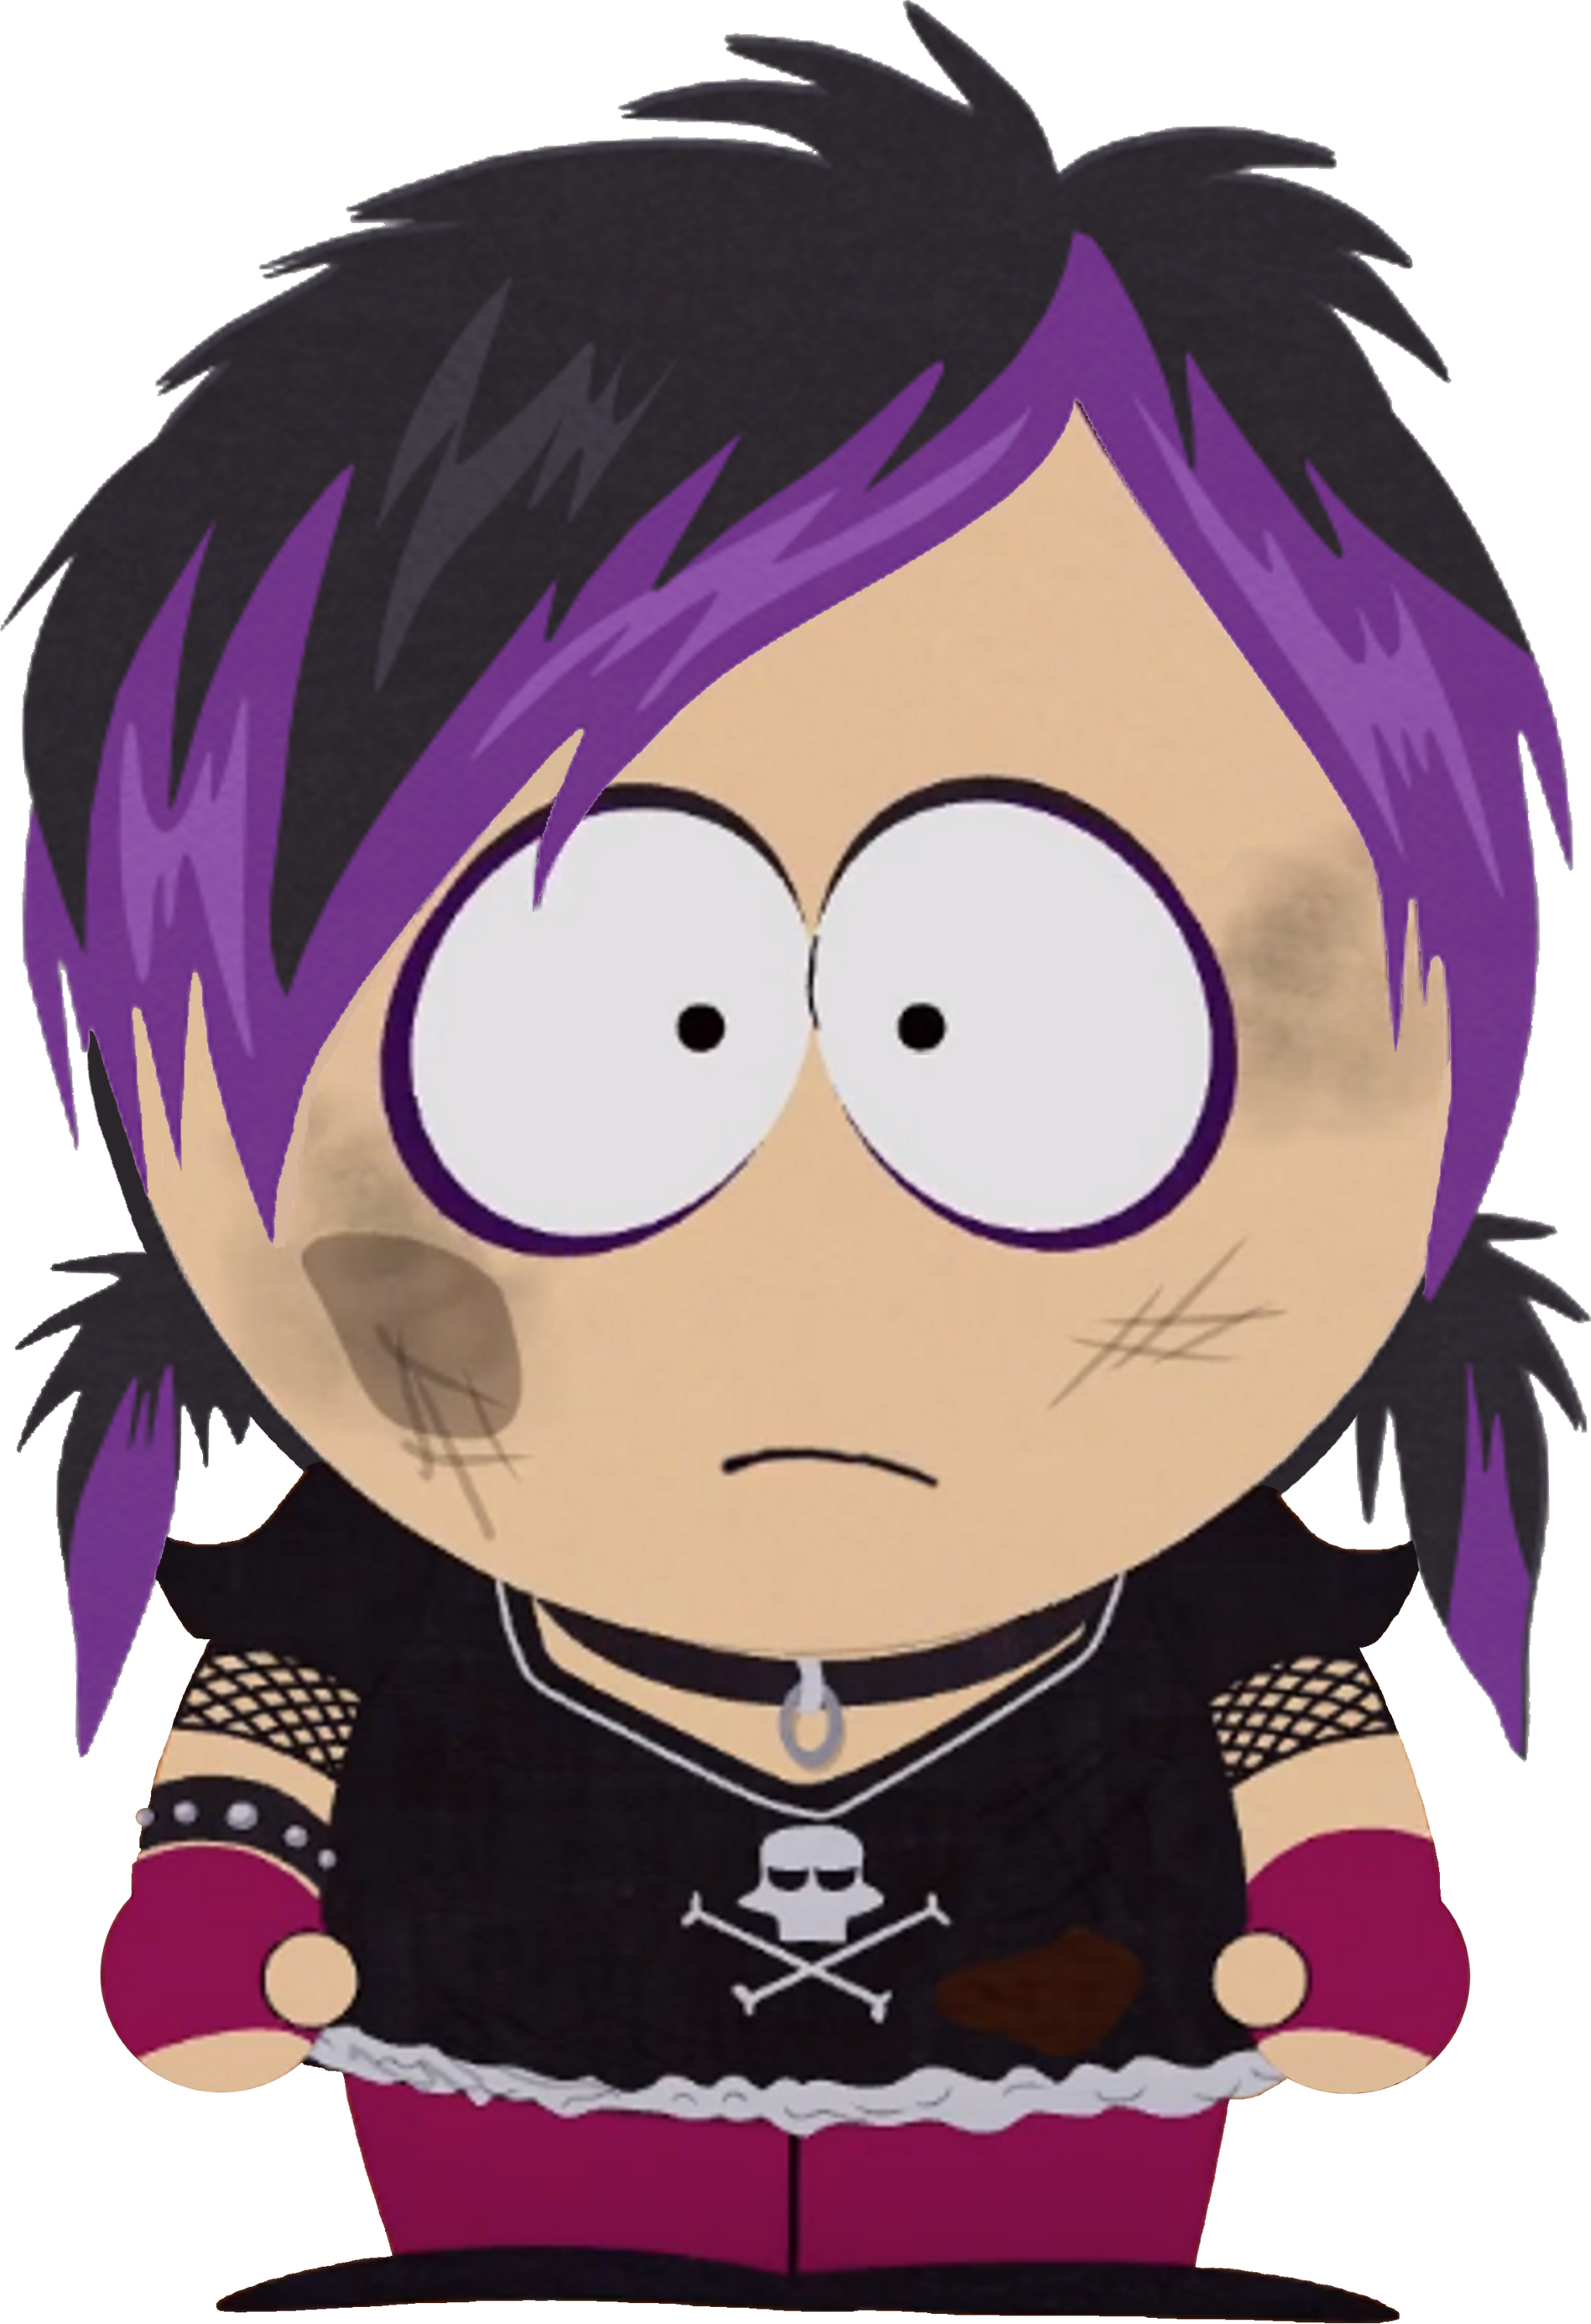 Goth Kids, South Park Character / Location / User talk etc